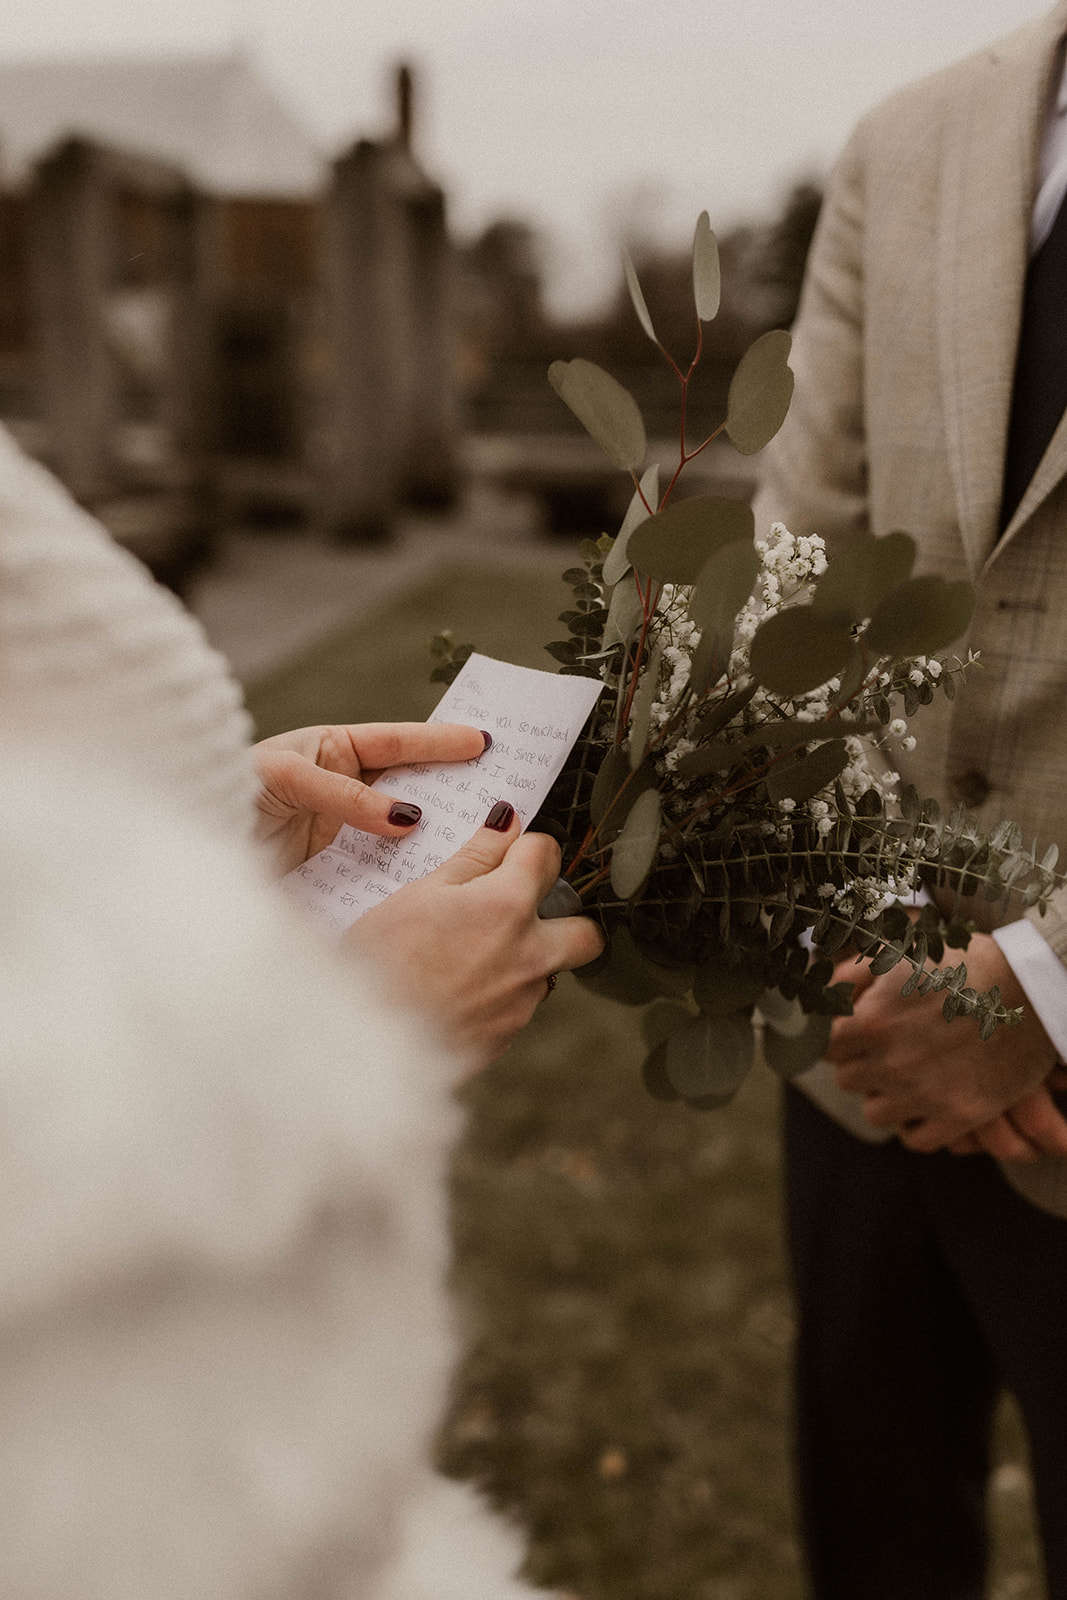 Intimate elopement ceremony in Albany, New York: exchanging vows amidst scenic beauty.